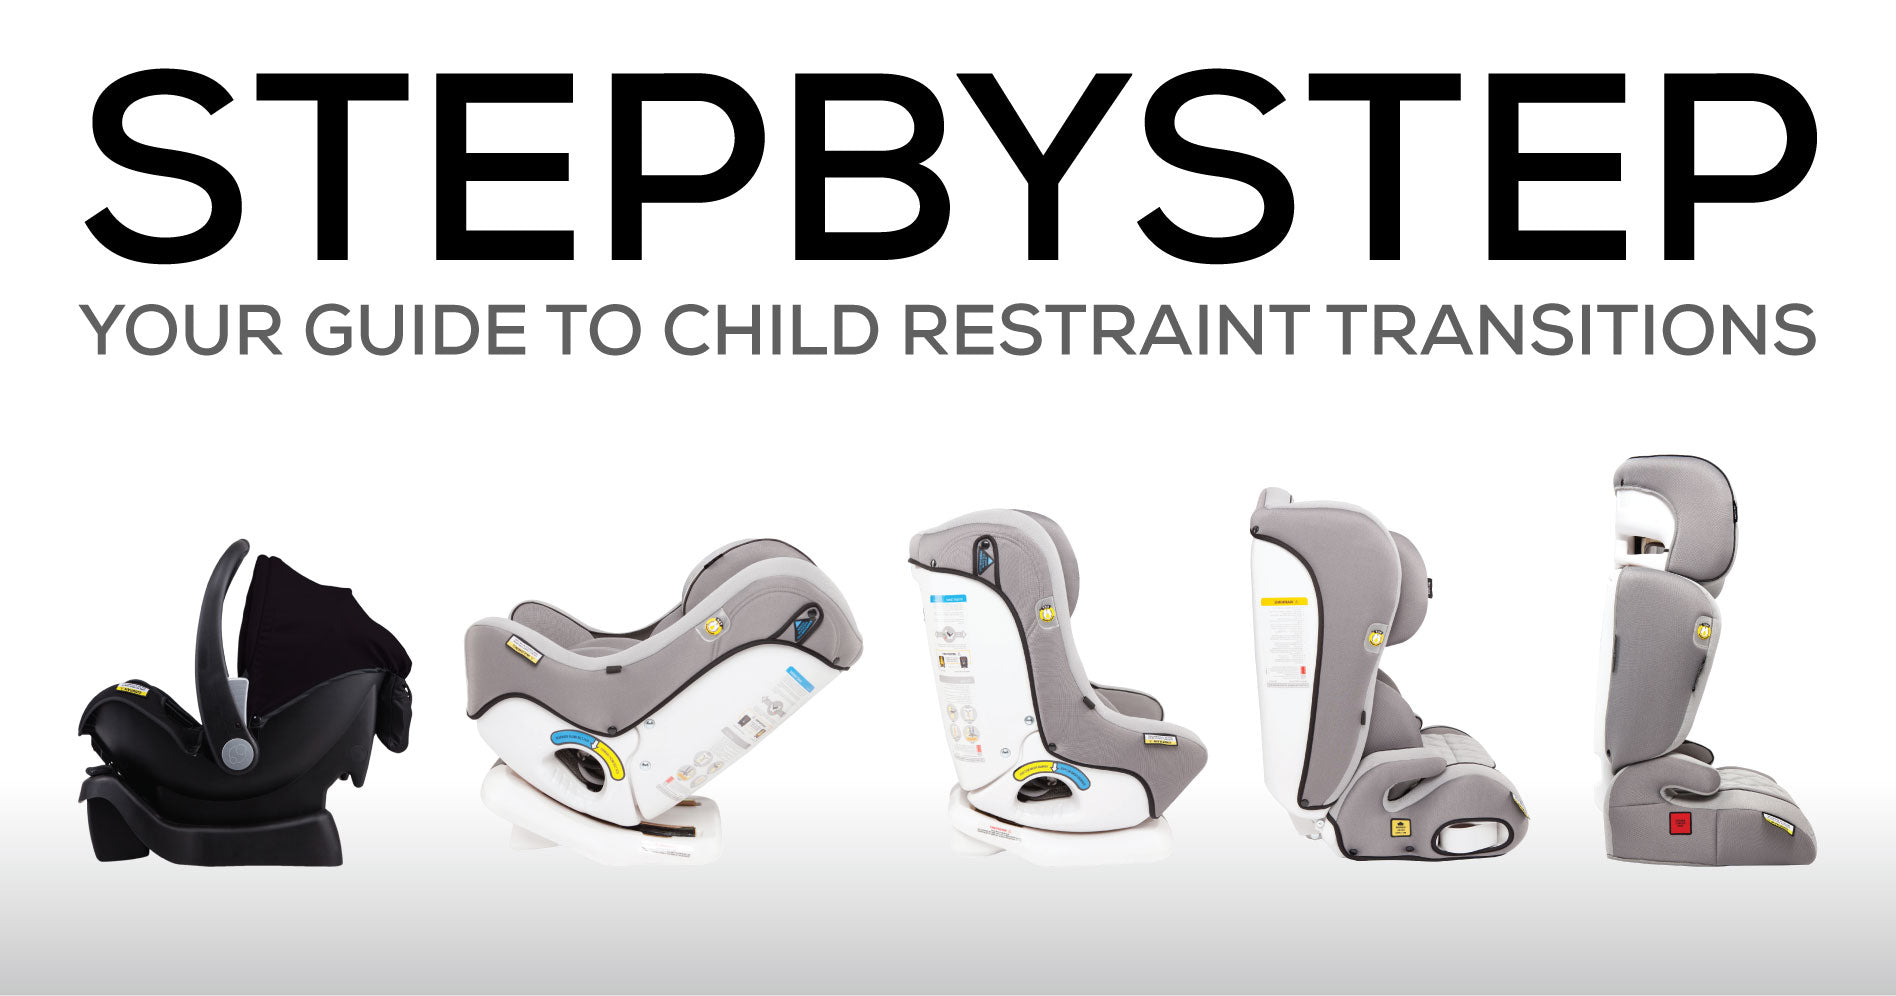 Step by Step: Your Guide to Child Restraint Transitions